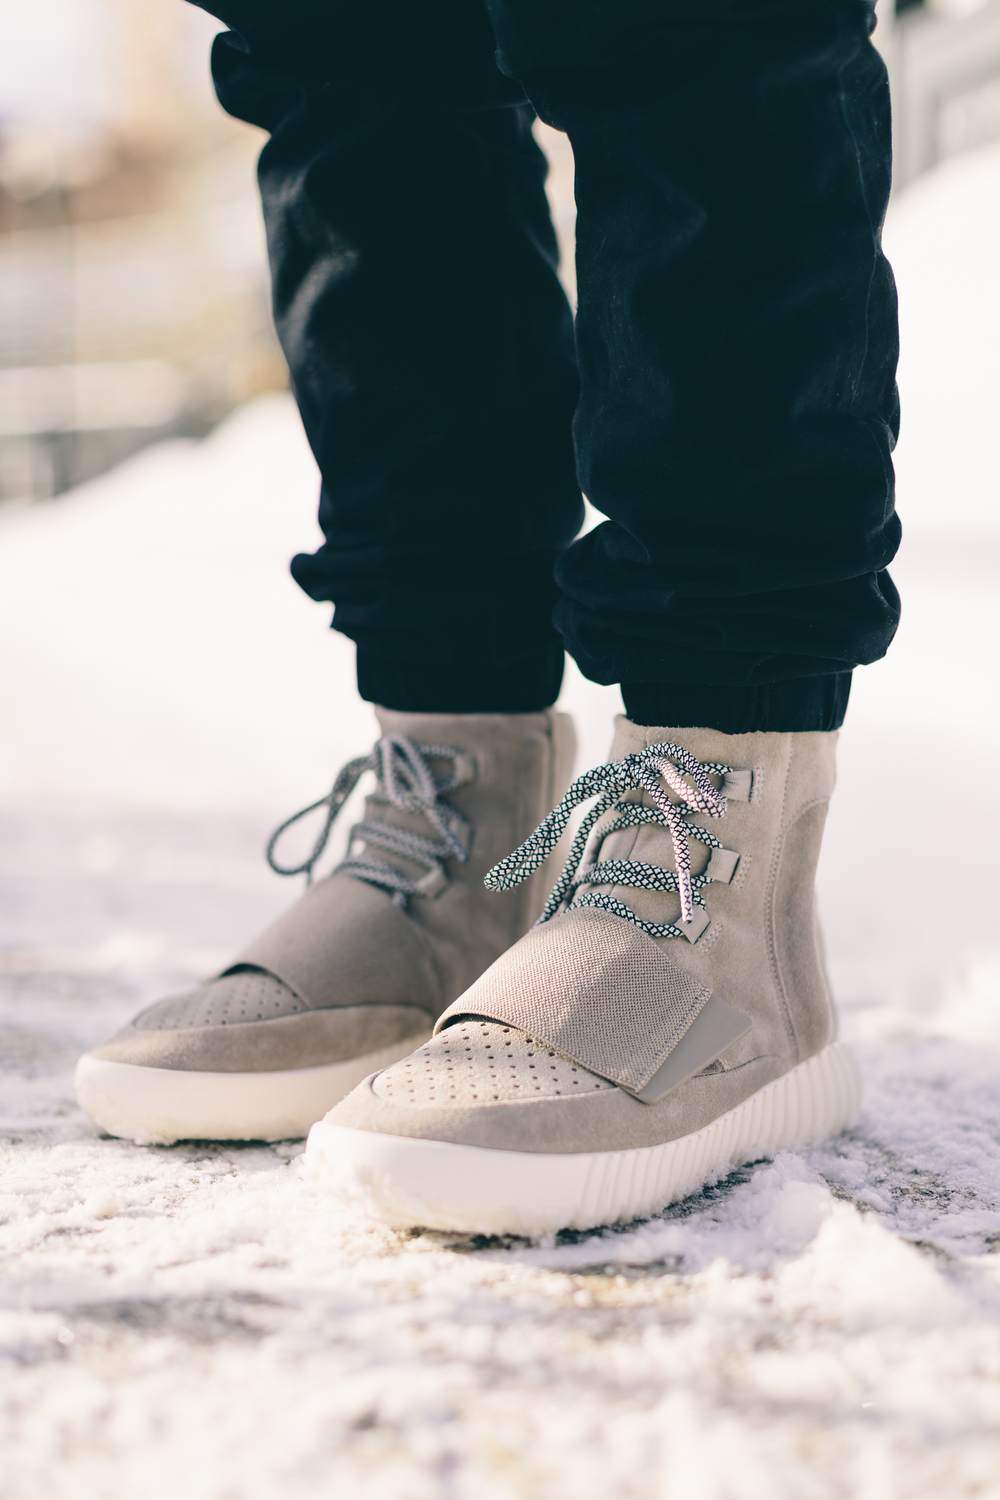 Postage Mockingbird Classroom On Foot Look at the Adidas Yeezy 750 Boost + Sizing Info — Sneaker Shouts